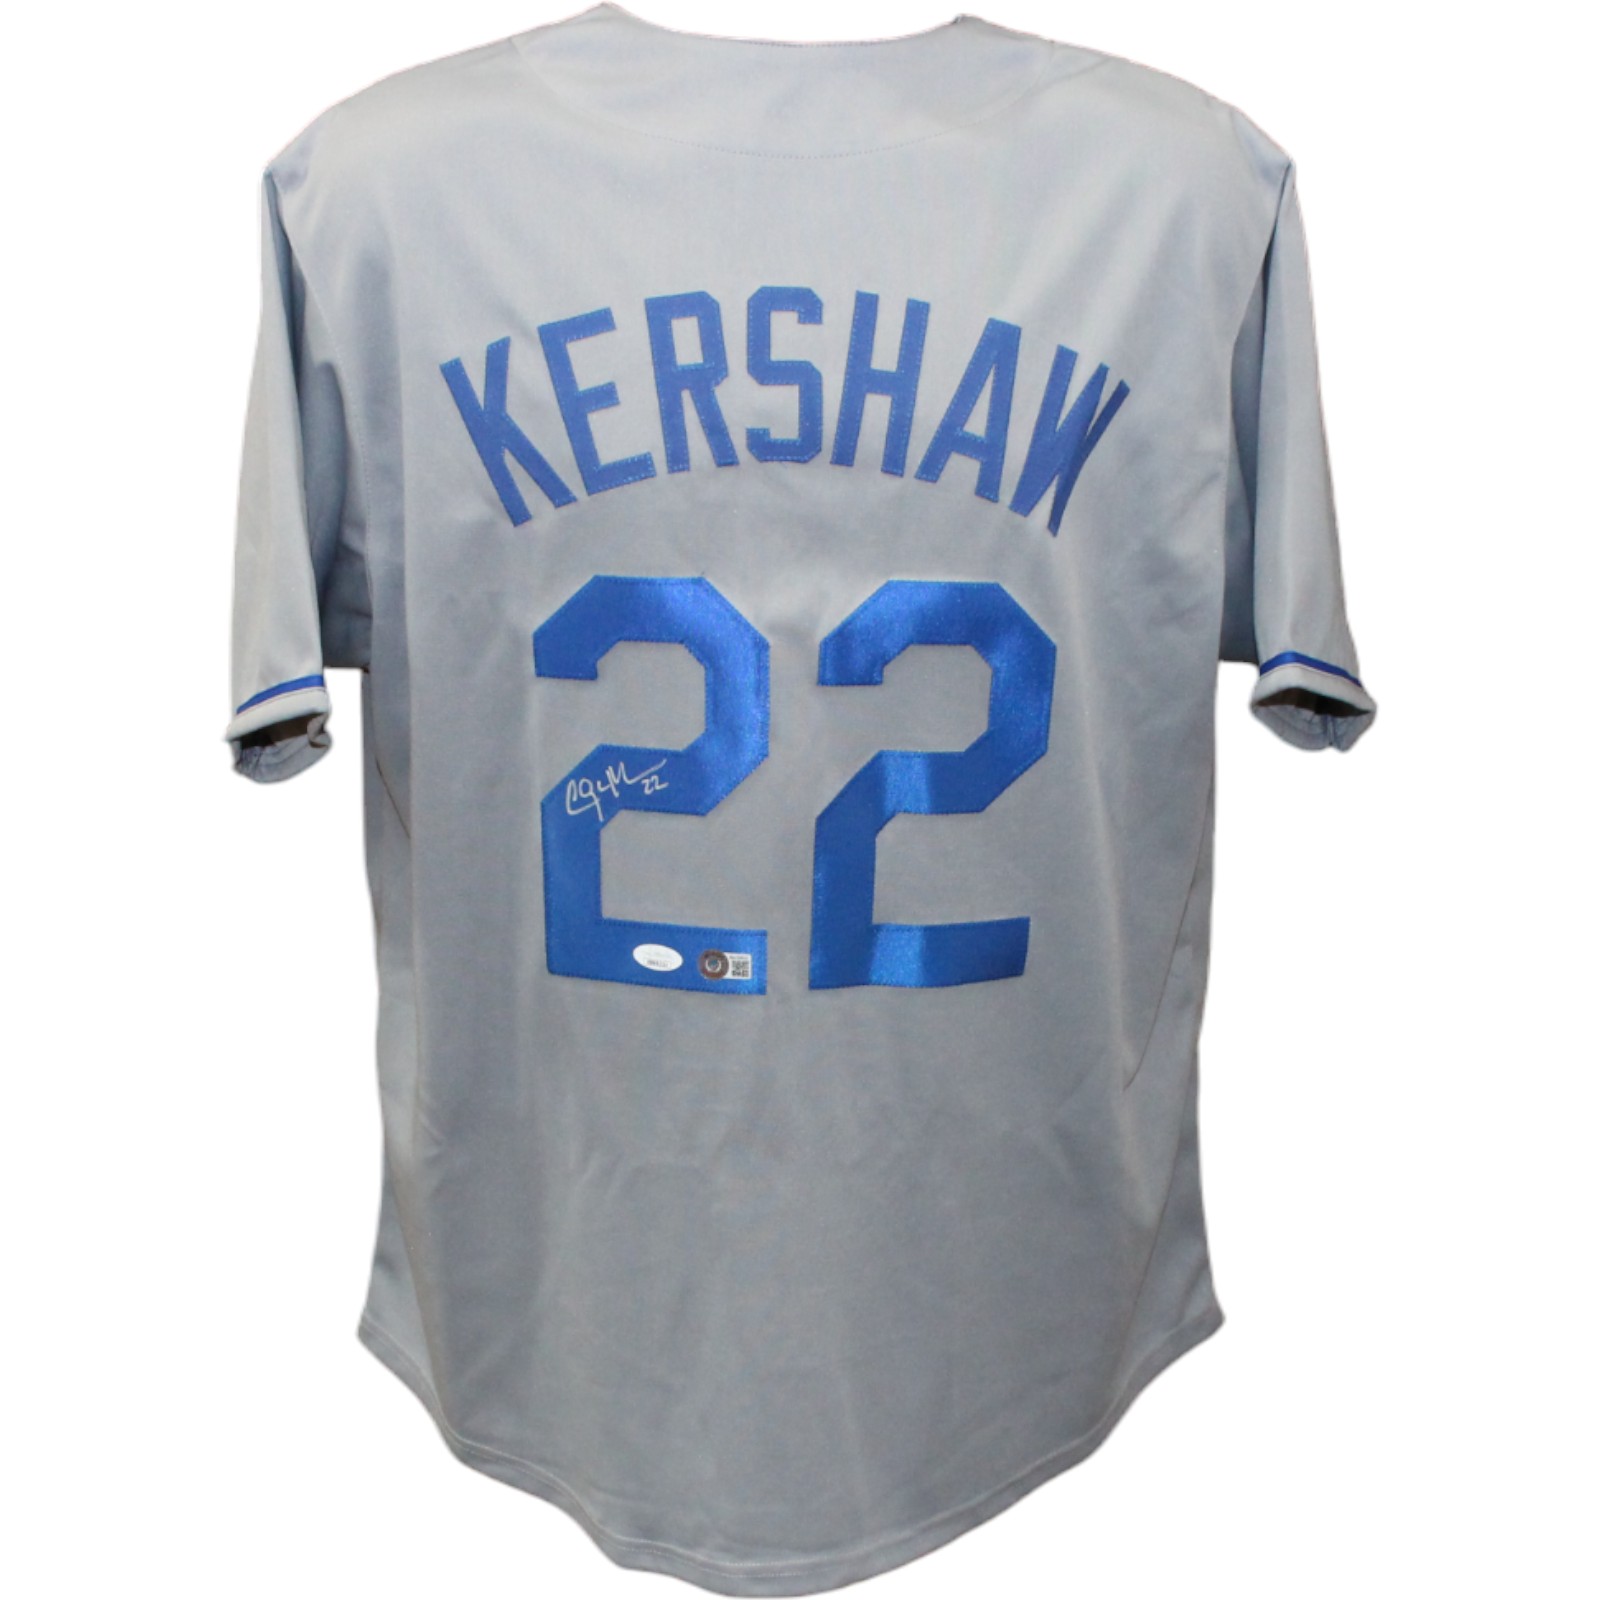 Clayton Kershaw Autographed/Signed Pro Style Grey Jersey Beckett